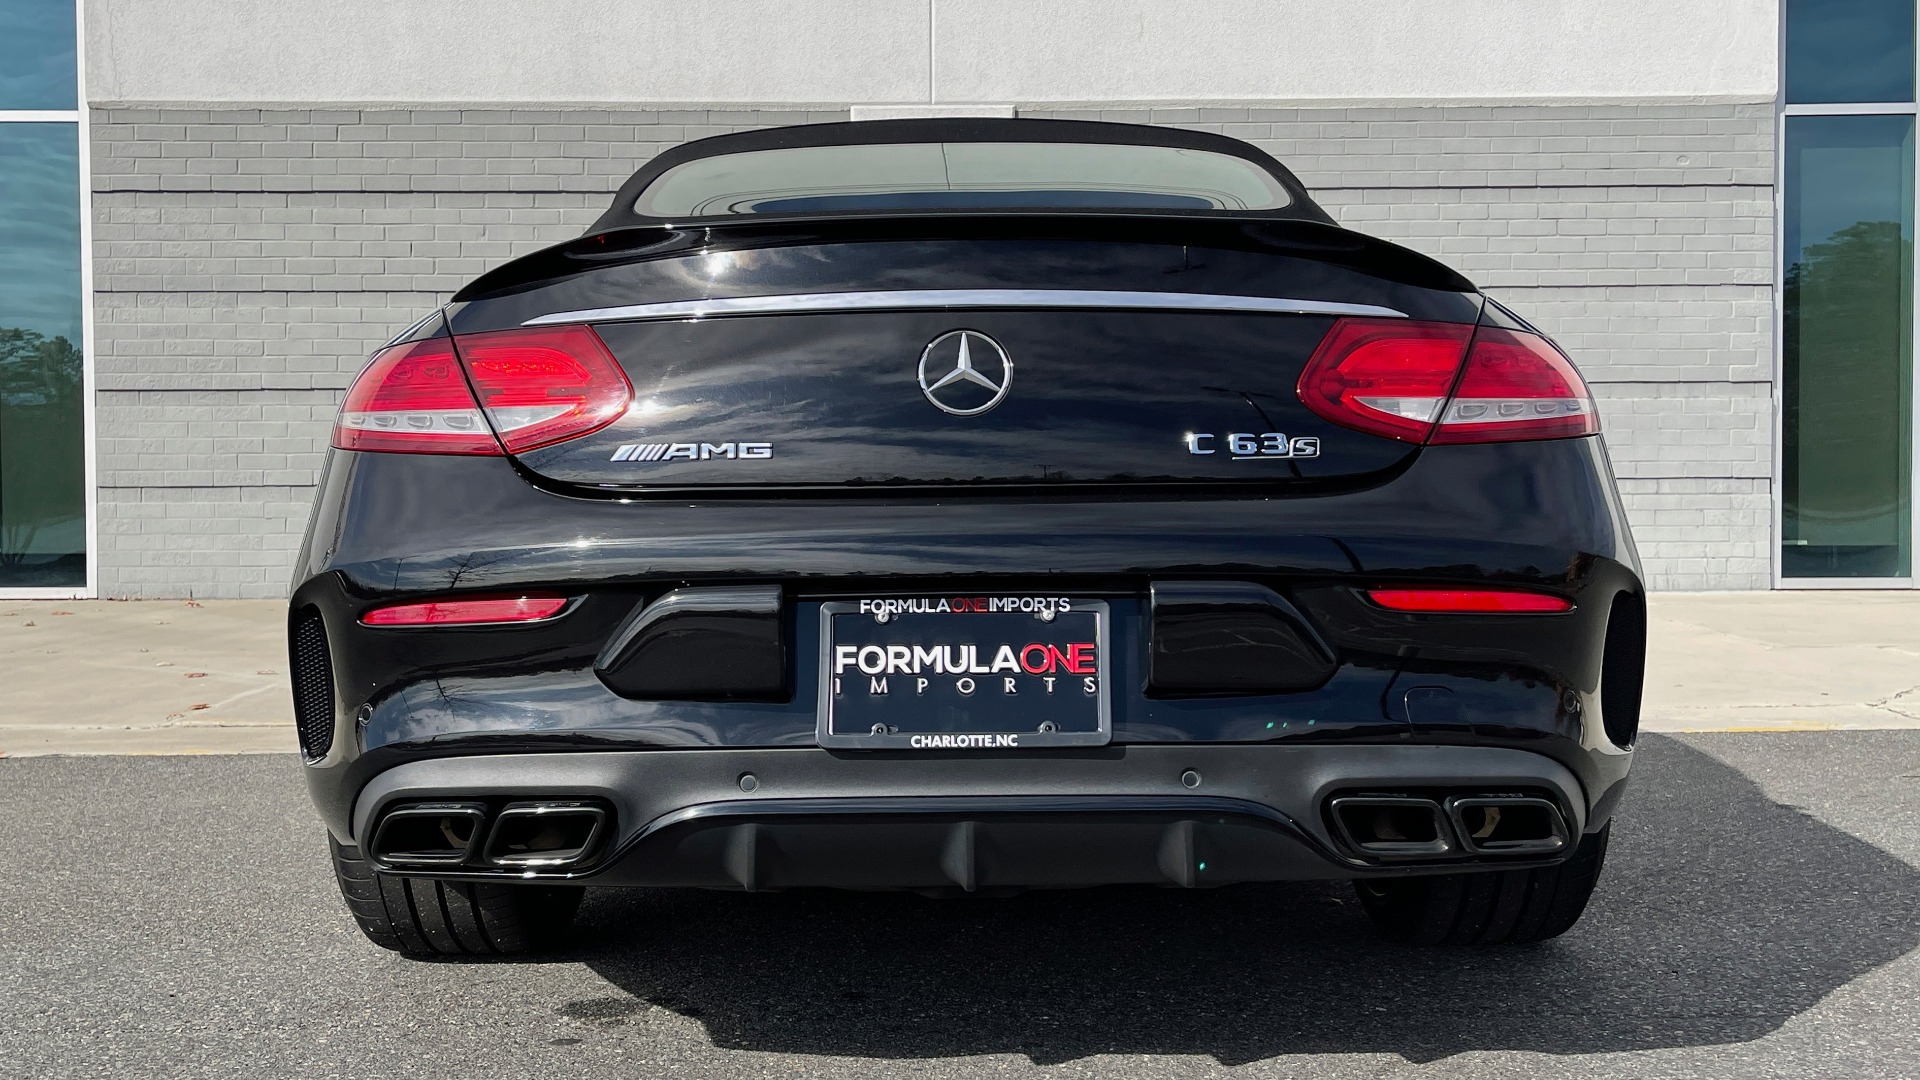 Used 2018 Mercedes-Benz C-CLASS AMG C63 S CABRIOLET / PREM / LIGHTING / MULTIMEDIA / NIGHT PKG for sale $84,000 at Formula Imports in Charlotte NC 28227 11